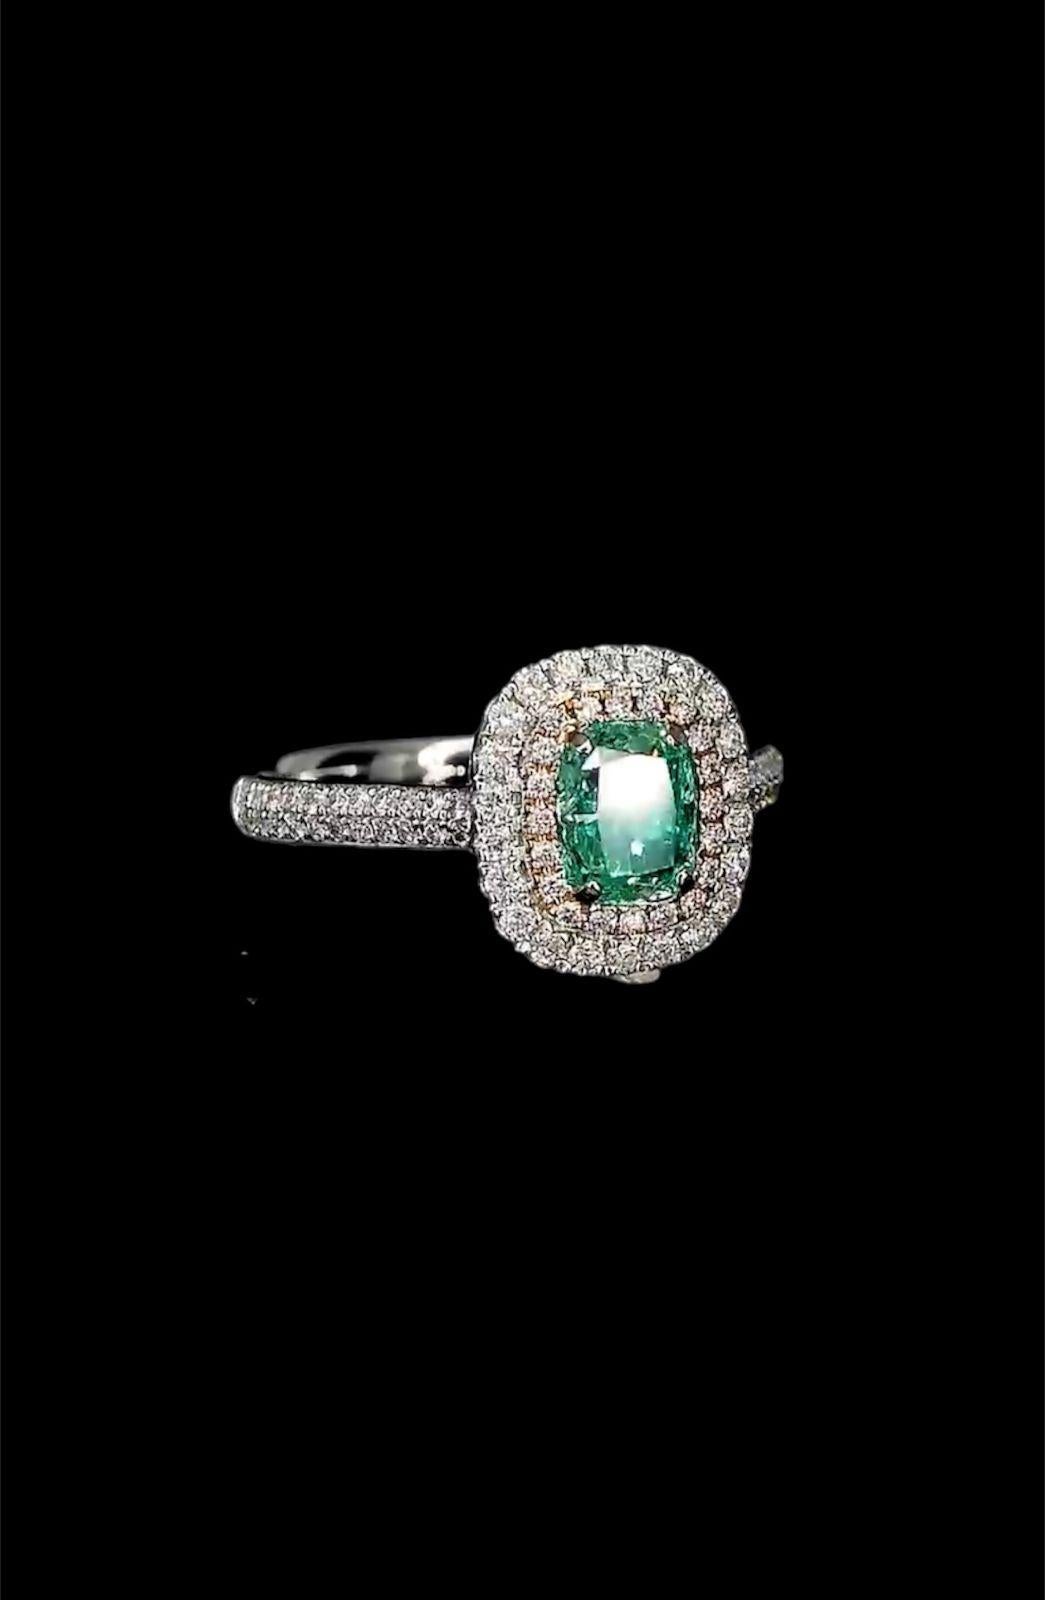 **100% NATURAL FANCY COLOUR DIAMOND JEWELRY**

✪ Jewelry Details ✪

♦ MAIN STONE DETAILS

➛ Stone Shape: Cushion
➛ Stone Color: Fancy Intense Green
➛ Stone Clarity: SI
➛ Stone Weight: 1.00 carats
➛ AGL certified

♦ SIDE STONE DETAILS

➛ Side white